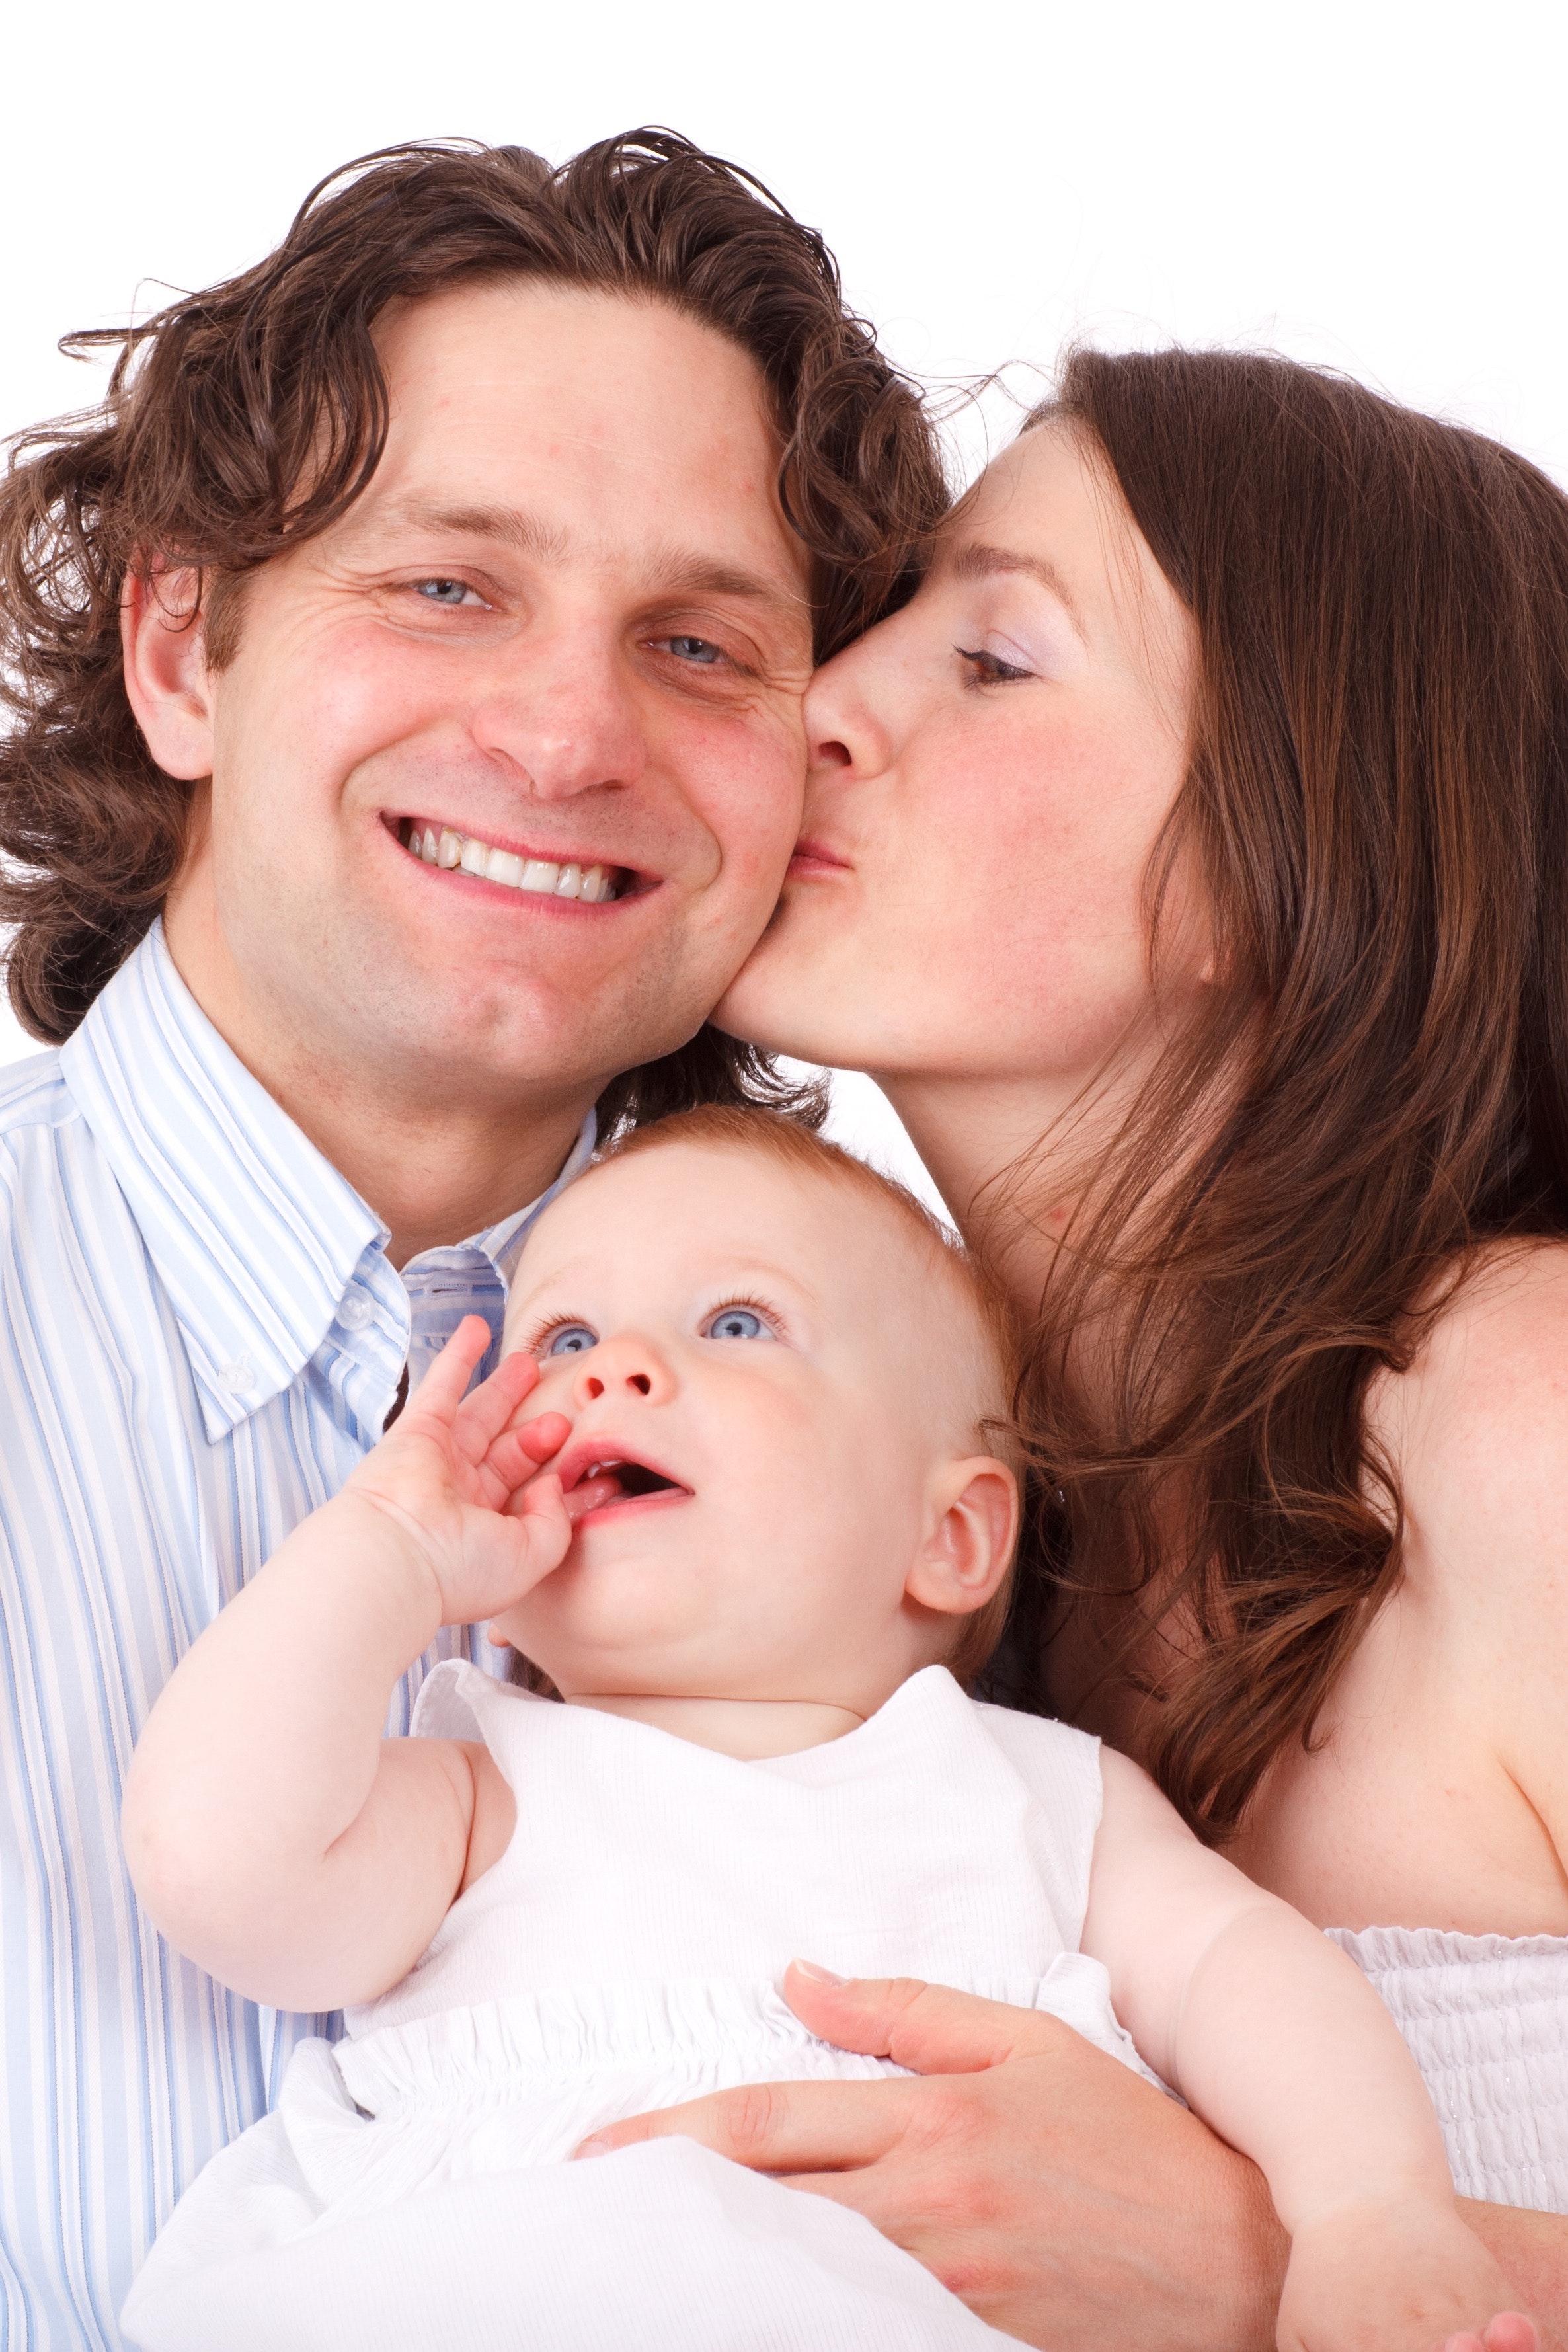 Brown Haired Woman Kissing Man in Blue White Dress Shirt Holding Baby in White Dress, Baby, Child, Family, Father, HQ Photo